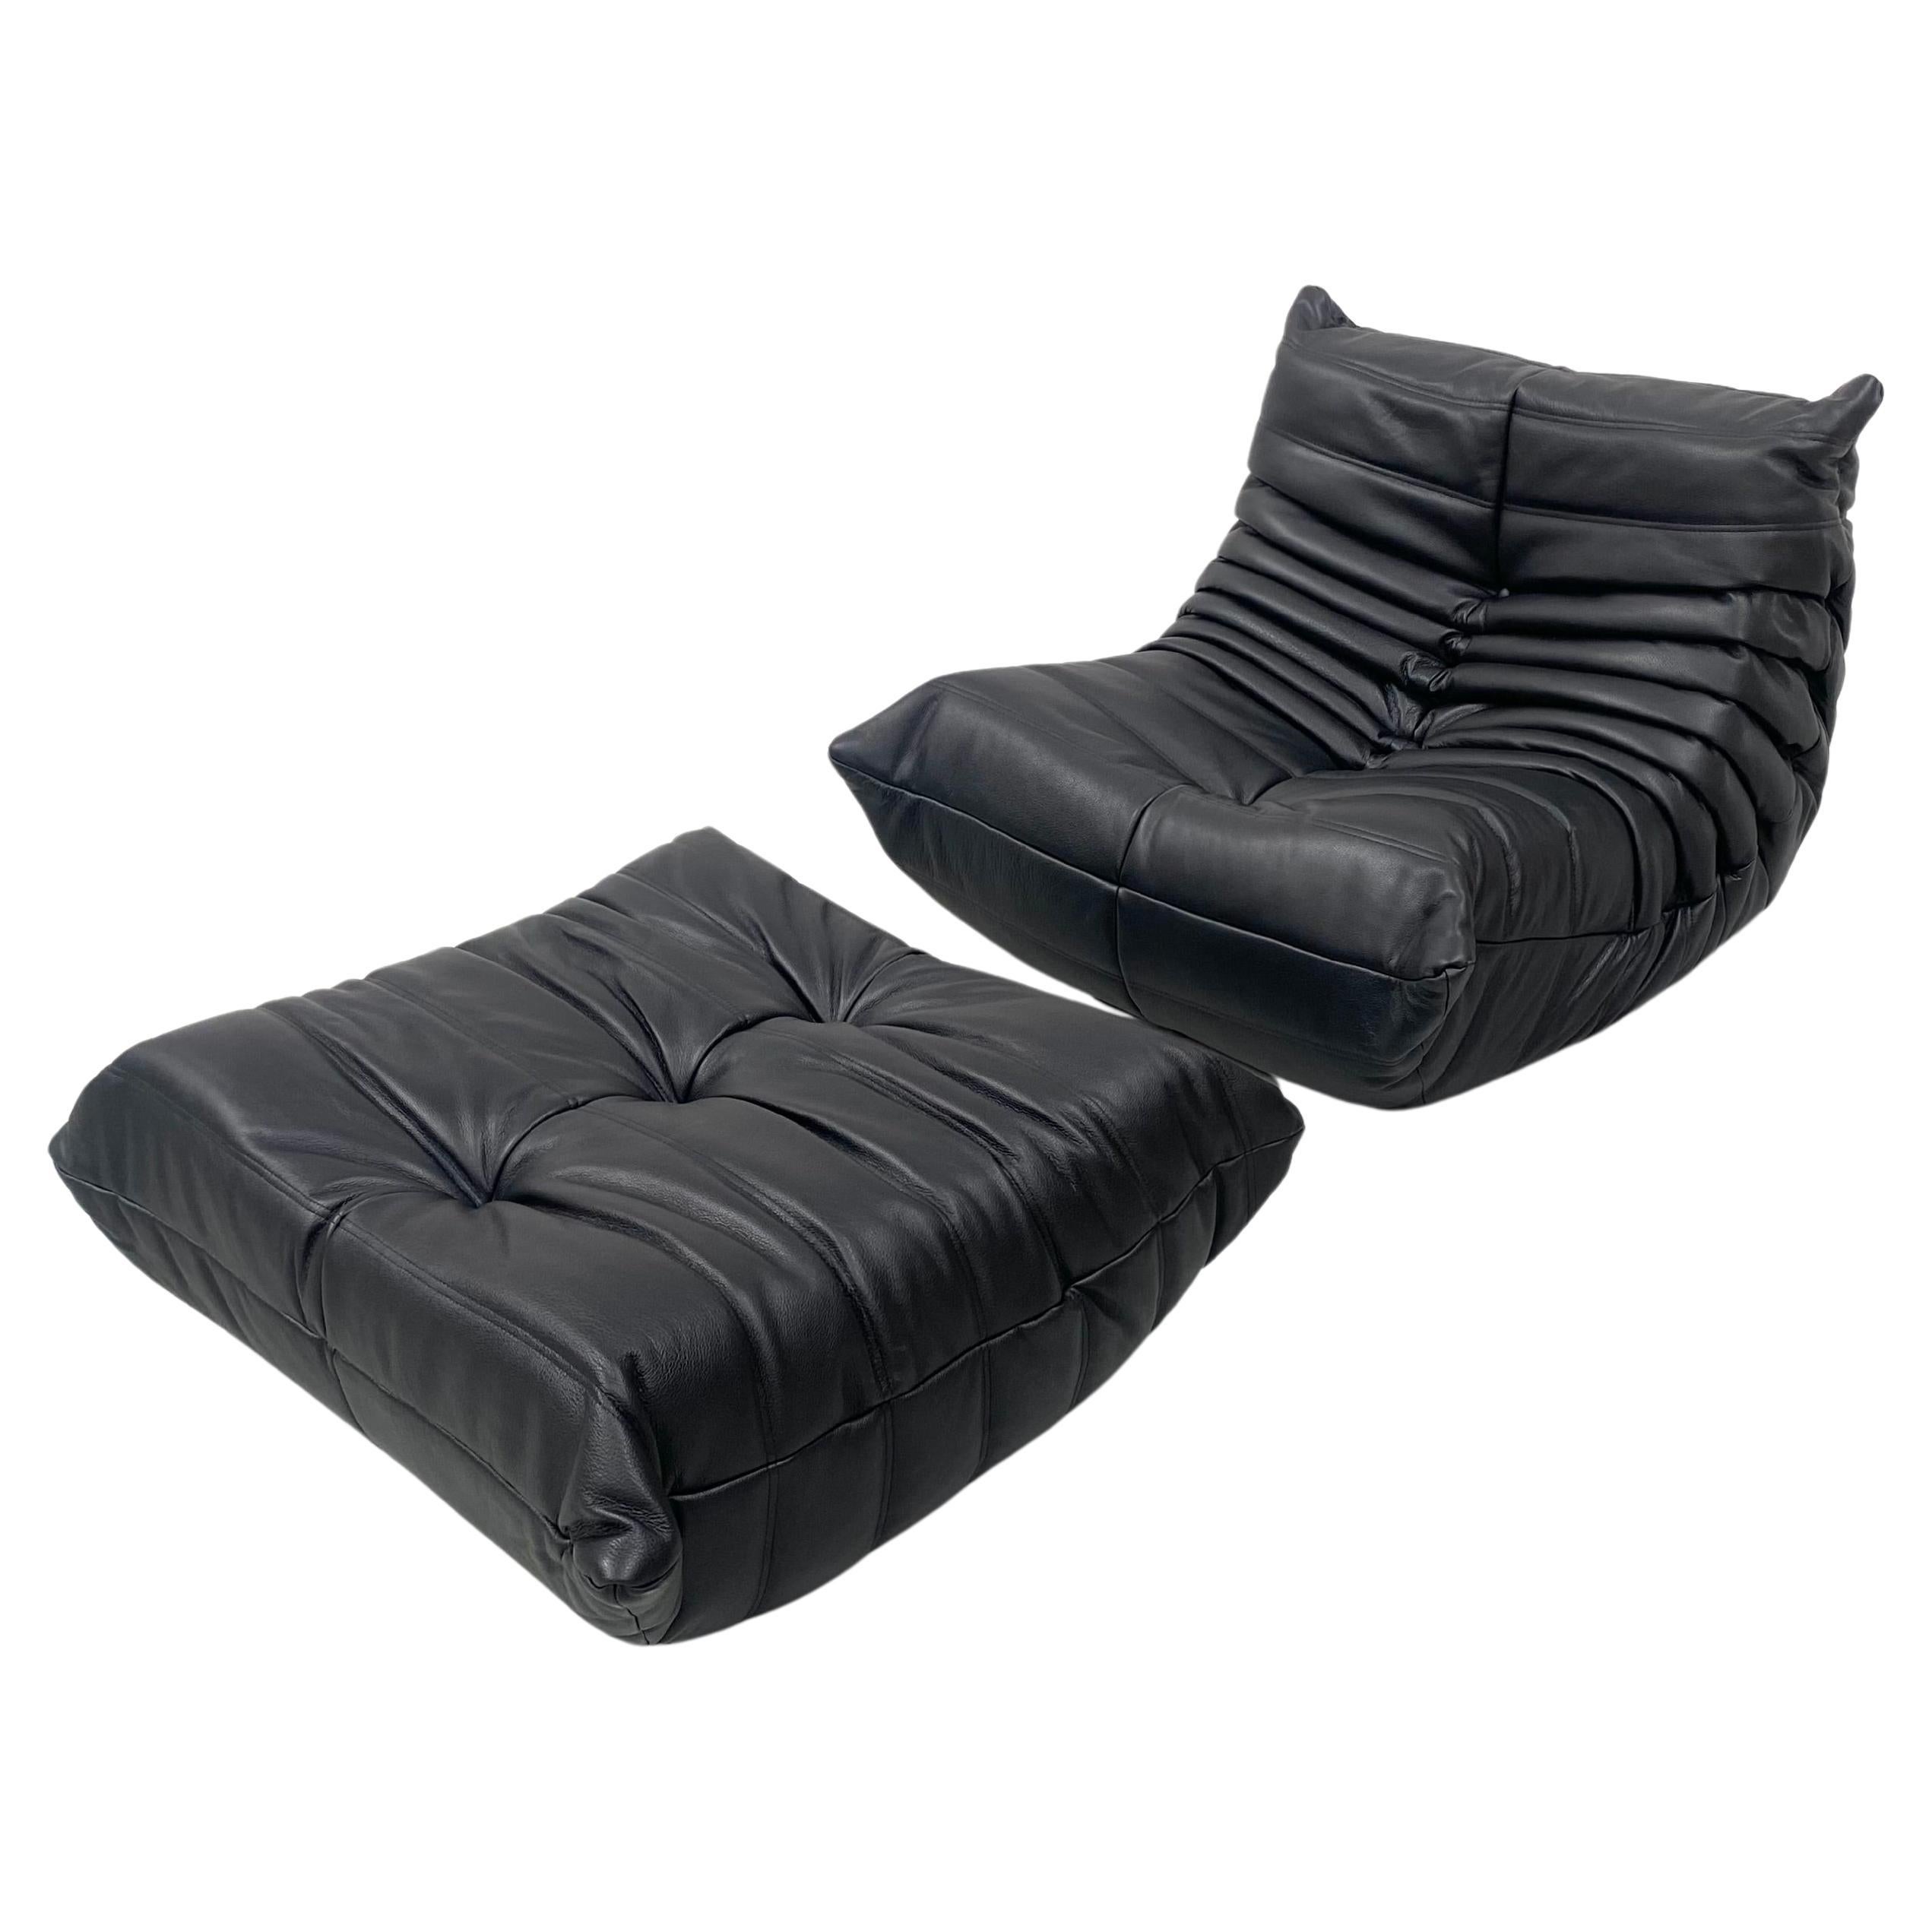 French Togo Chair and Ottoman in Black Leather by M. Ducaroy for Ligne Roset.